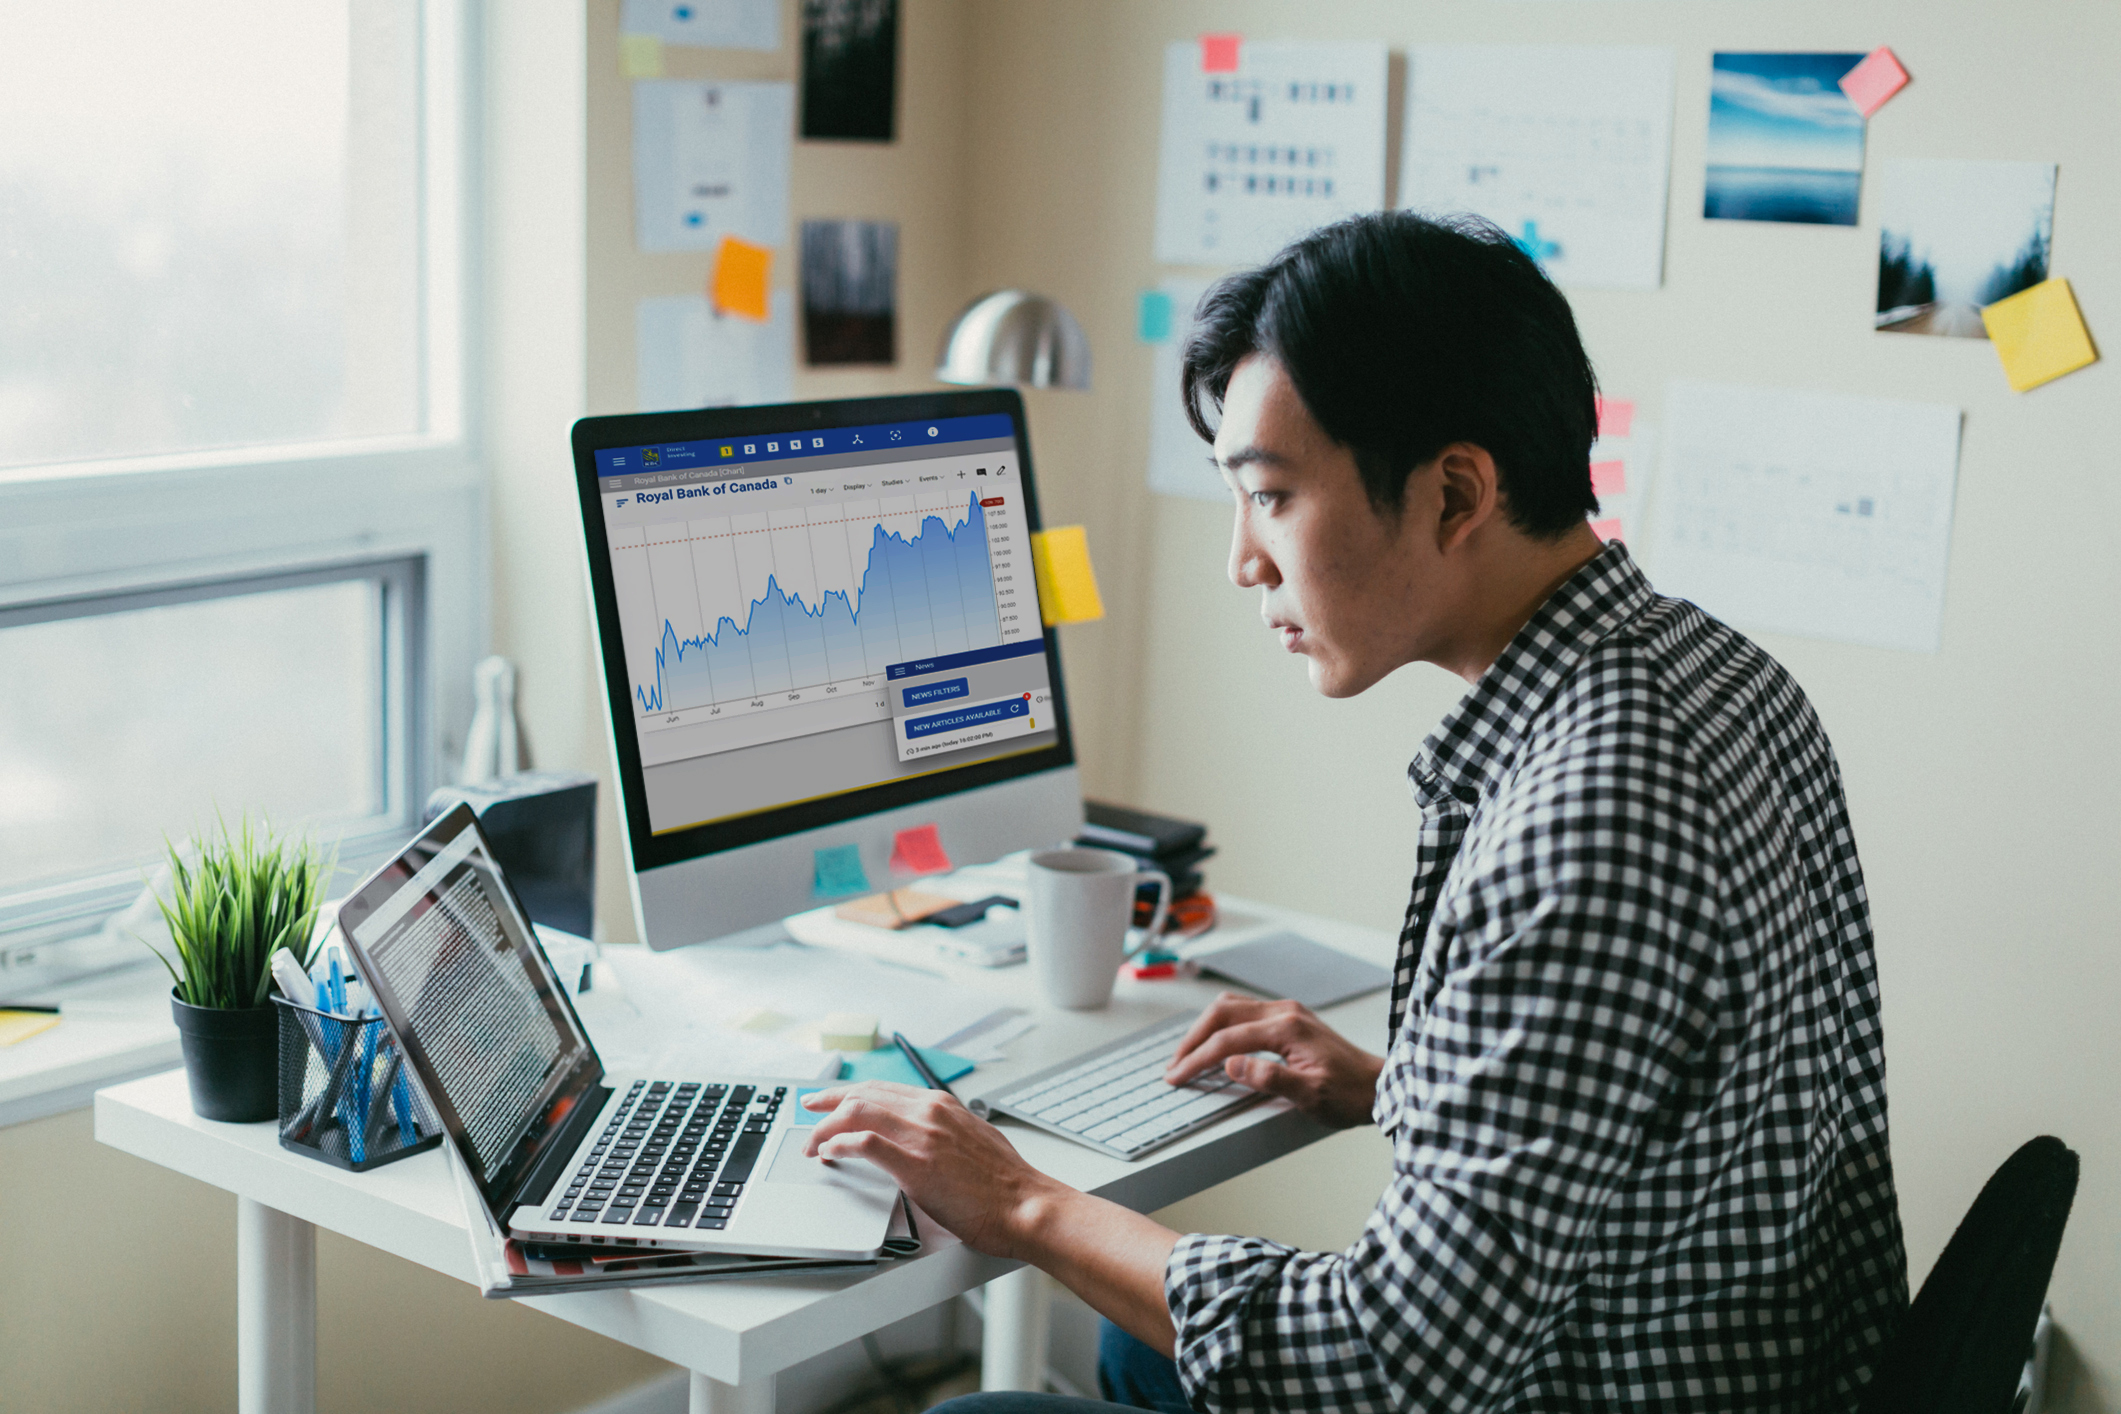 Power up your online trading experience: Custom views, real-time data, latest news and more on new Trading Dashboard at RBC Direct Investing put you in control!